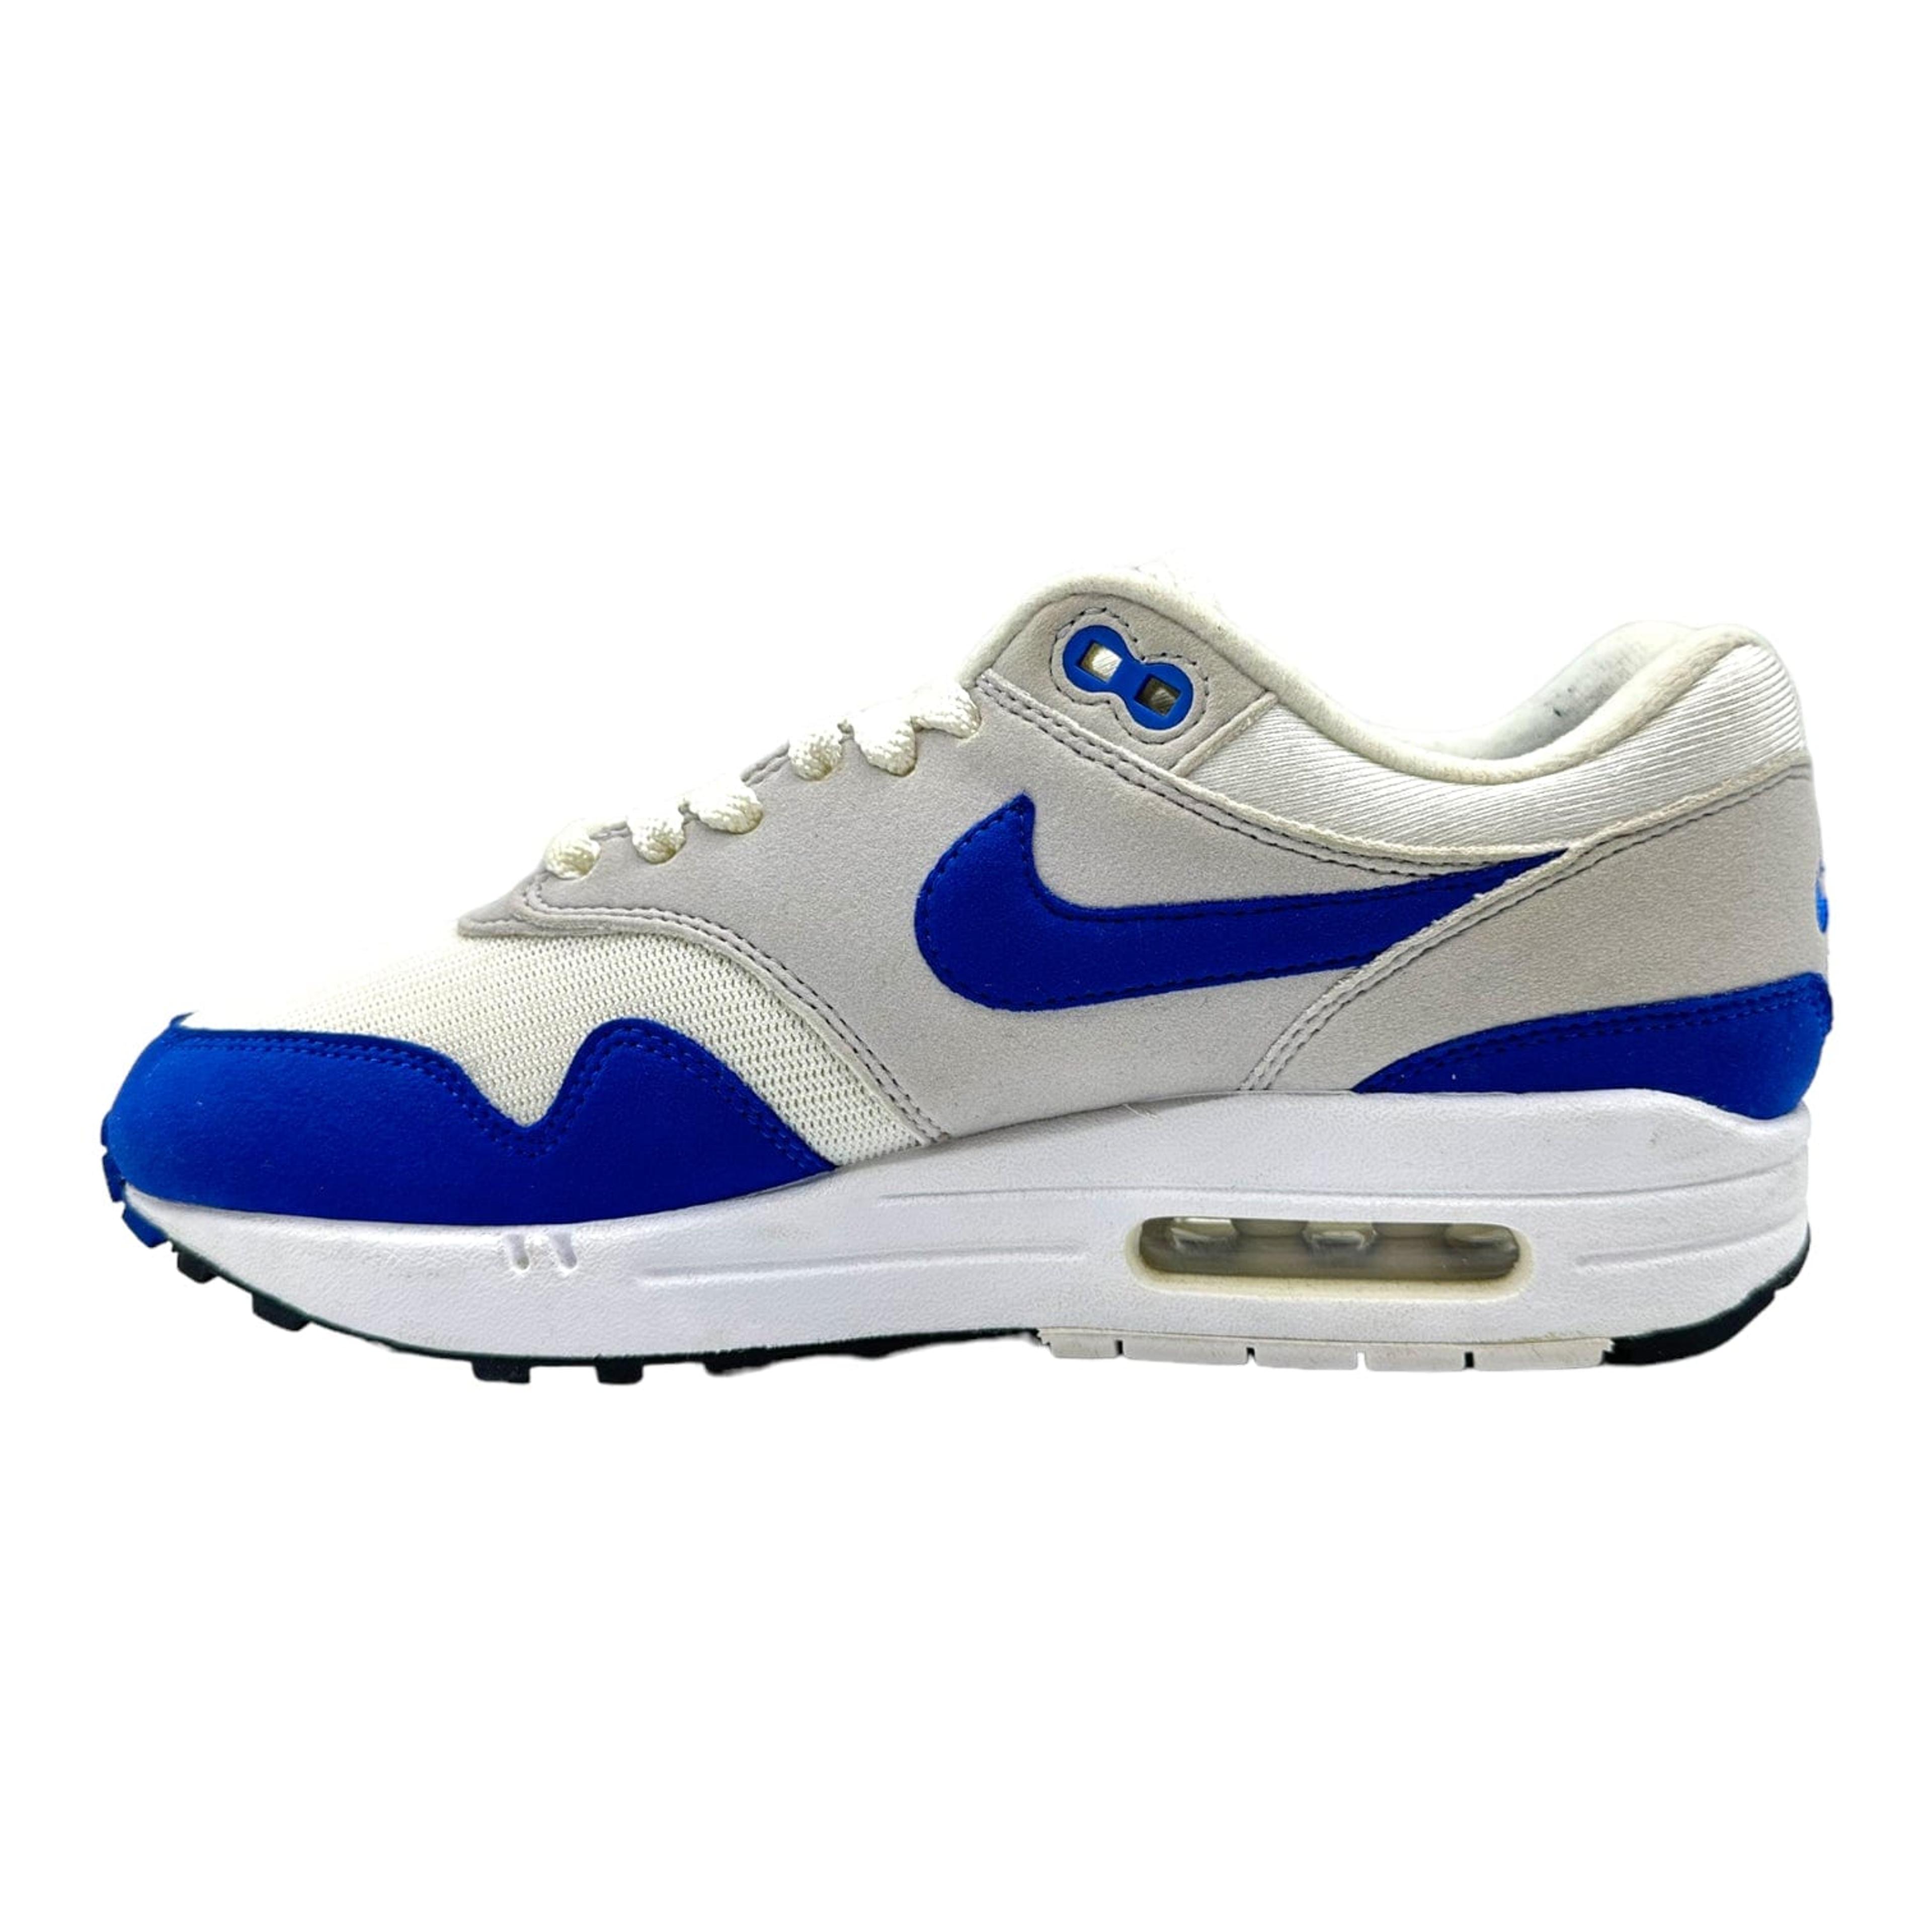 Alternate View 2 of Nike Air Max 1 Anniversary Royal (2017) Pre-Owned